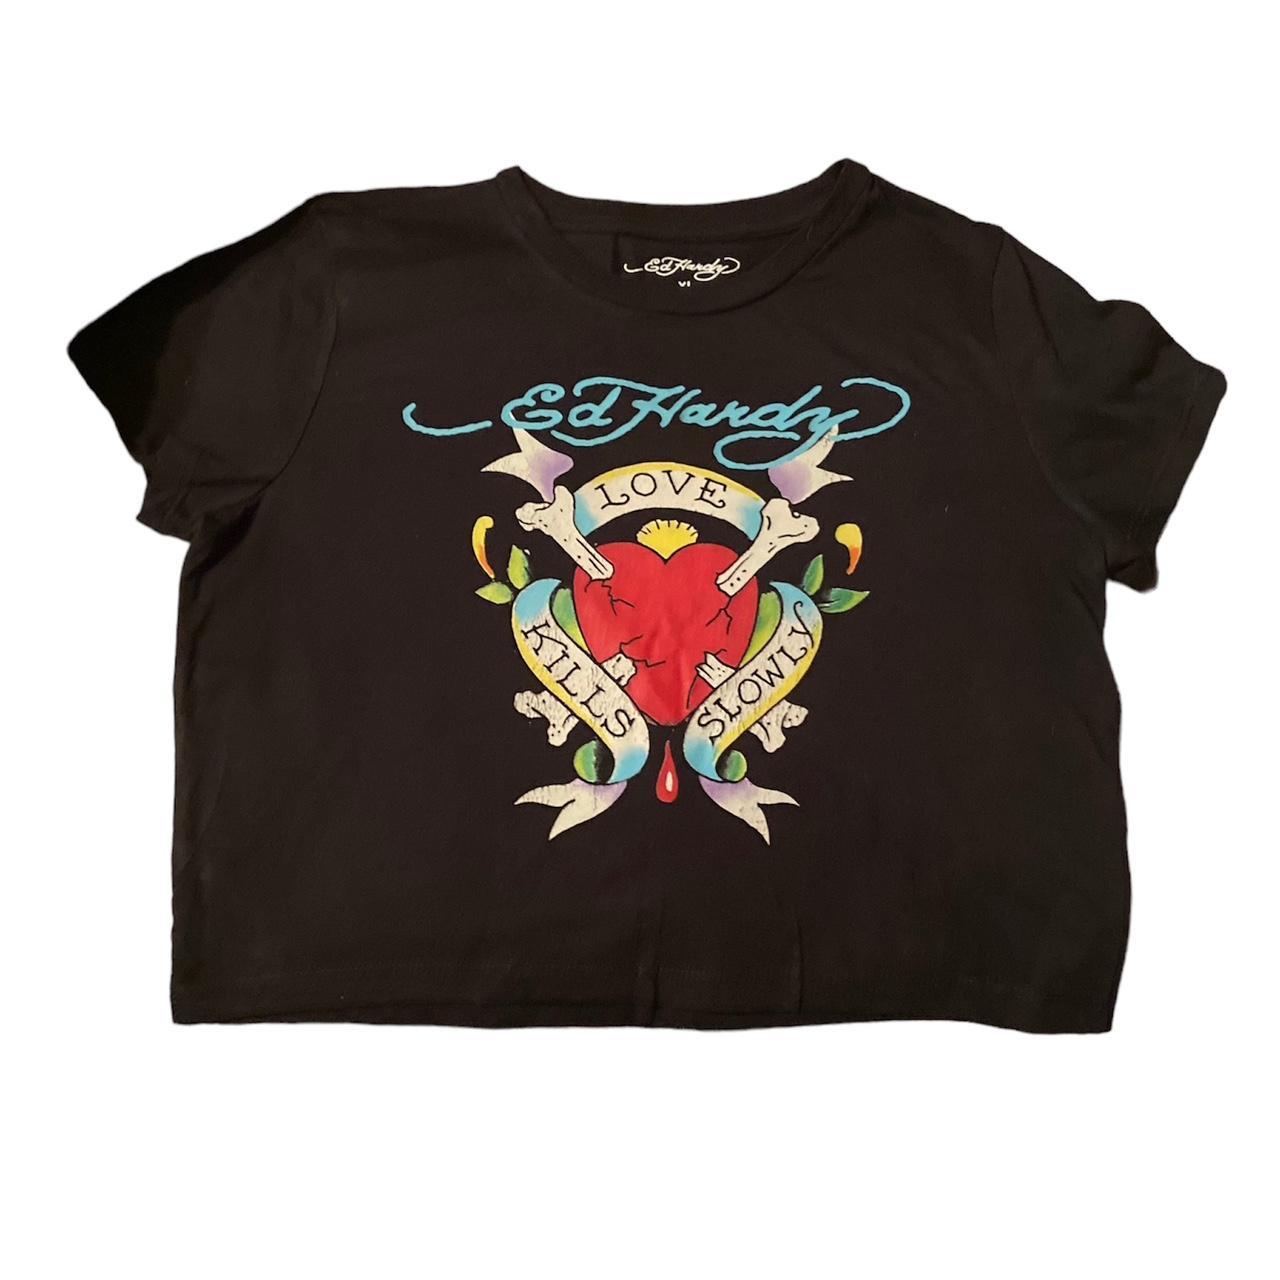 ed hardy cropped tee in size xl. the image is... - Depop